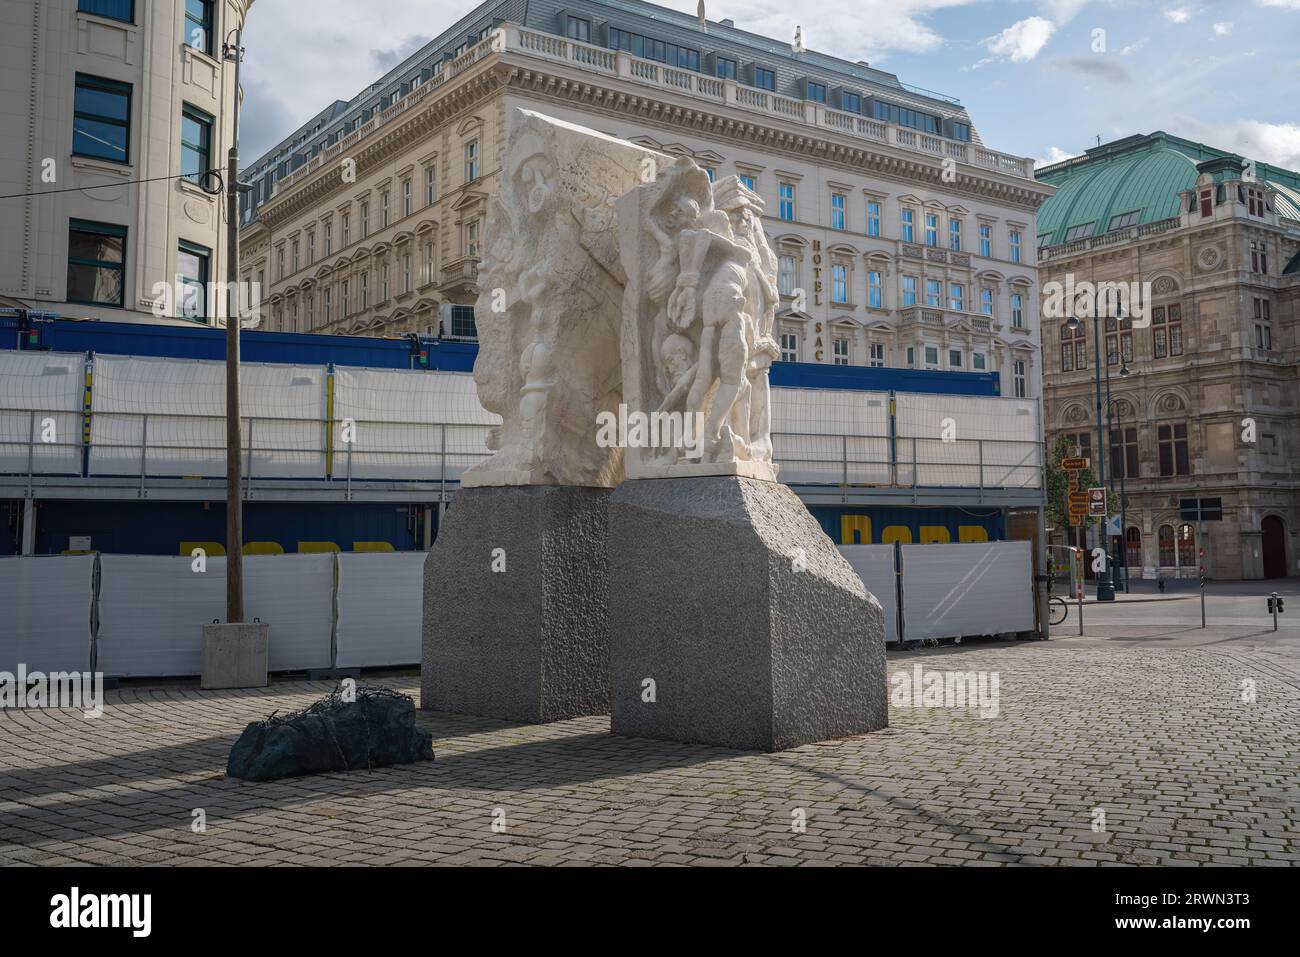 Gate of Violence Sculpture part of the Memorial against war and fascism by Alfred Hrdlicka at Albertinaplatz - Vienna, Austria Stock Photo